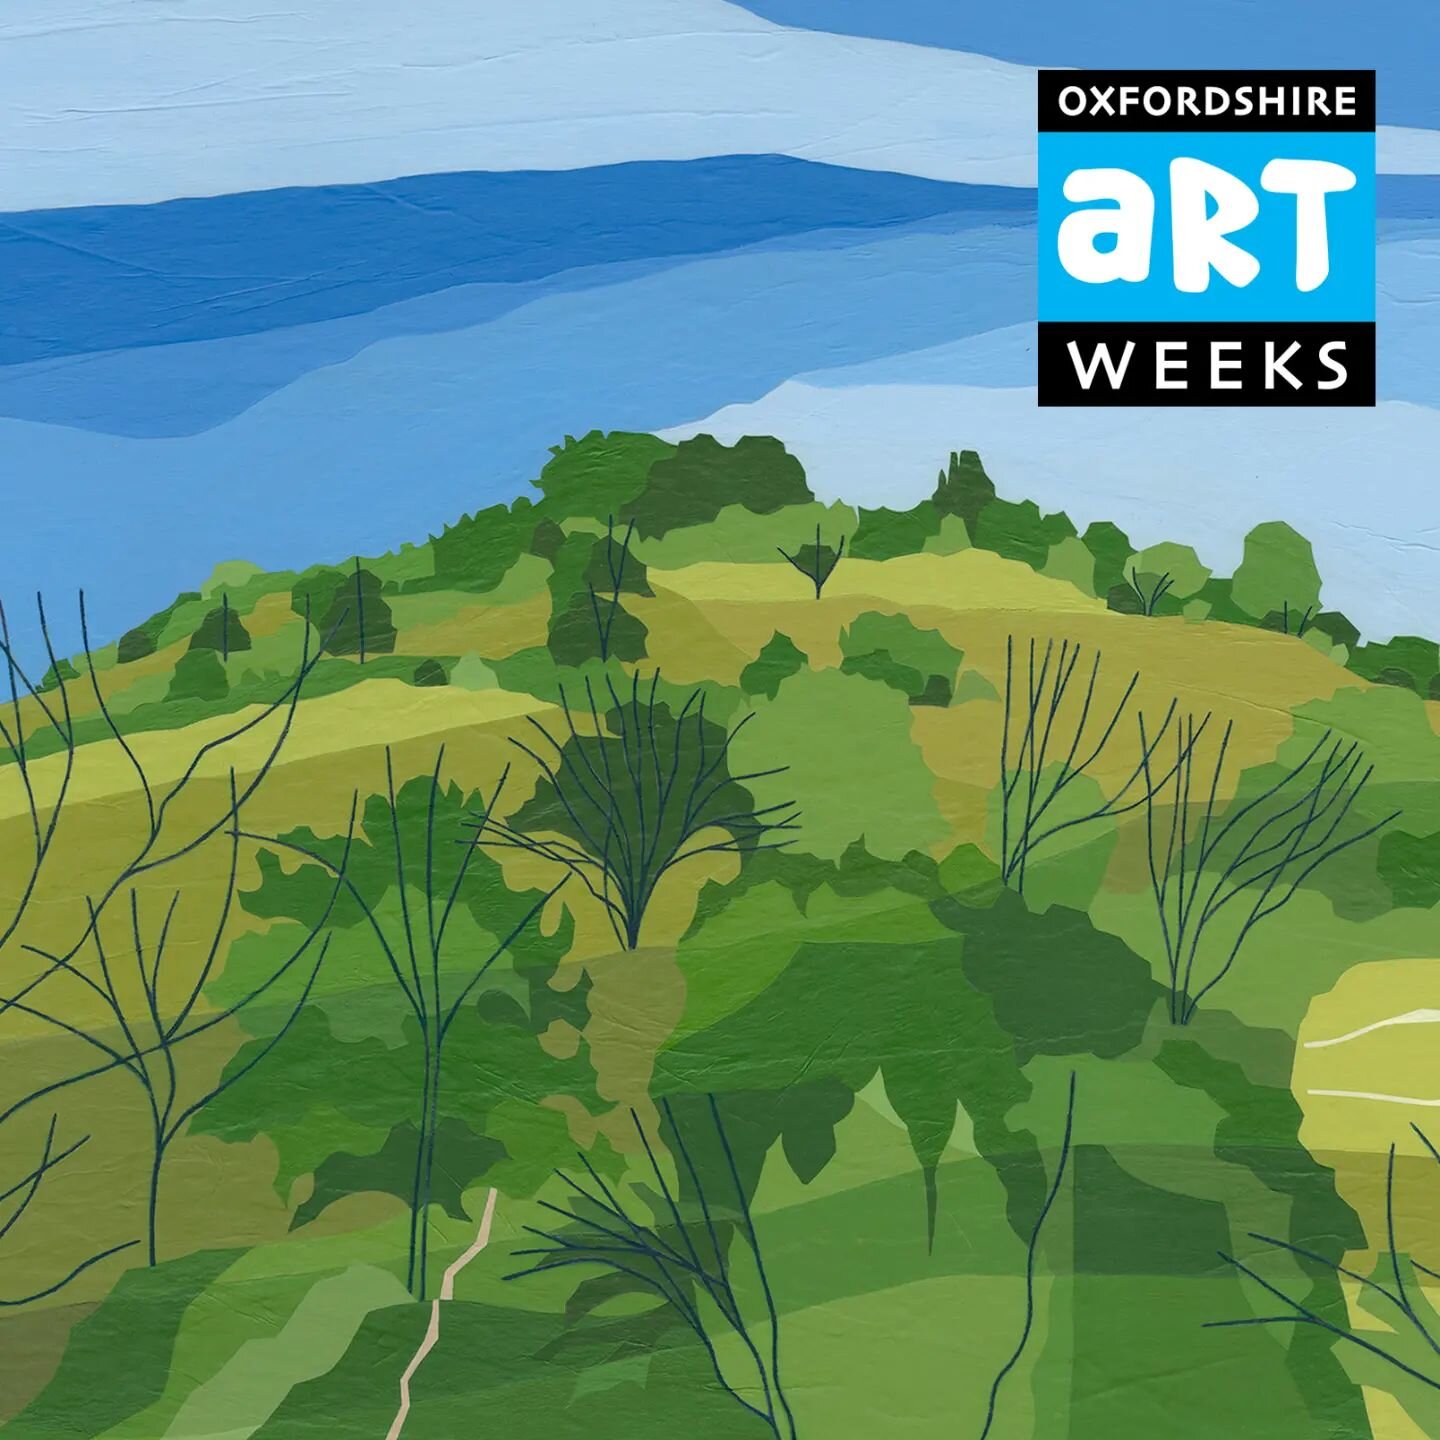 Less than four weeks til my Oxfordshire Art Weeks open studio here in Wallingford. Ceramicist Robyn Hardyman and jeweller Kate Wilkinson will be with me at The Coach House, Castle Street. 

Open Saturday 6 - Sunday 14 May (apart from the Wednesday), 